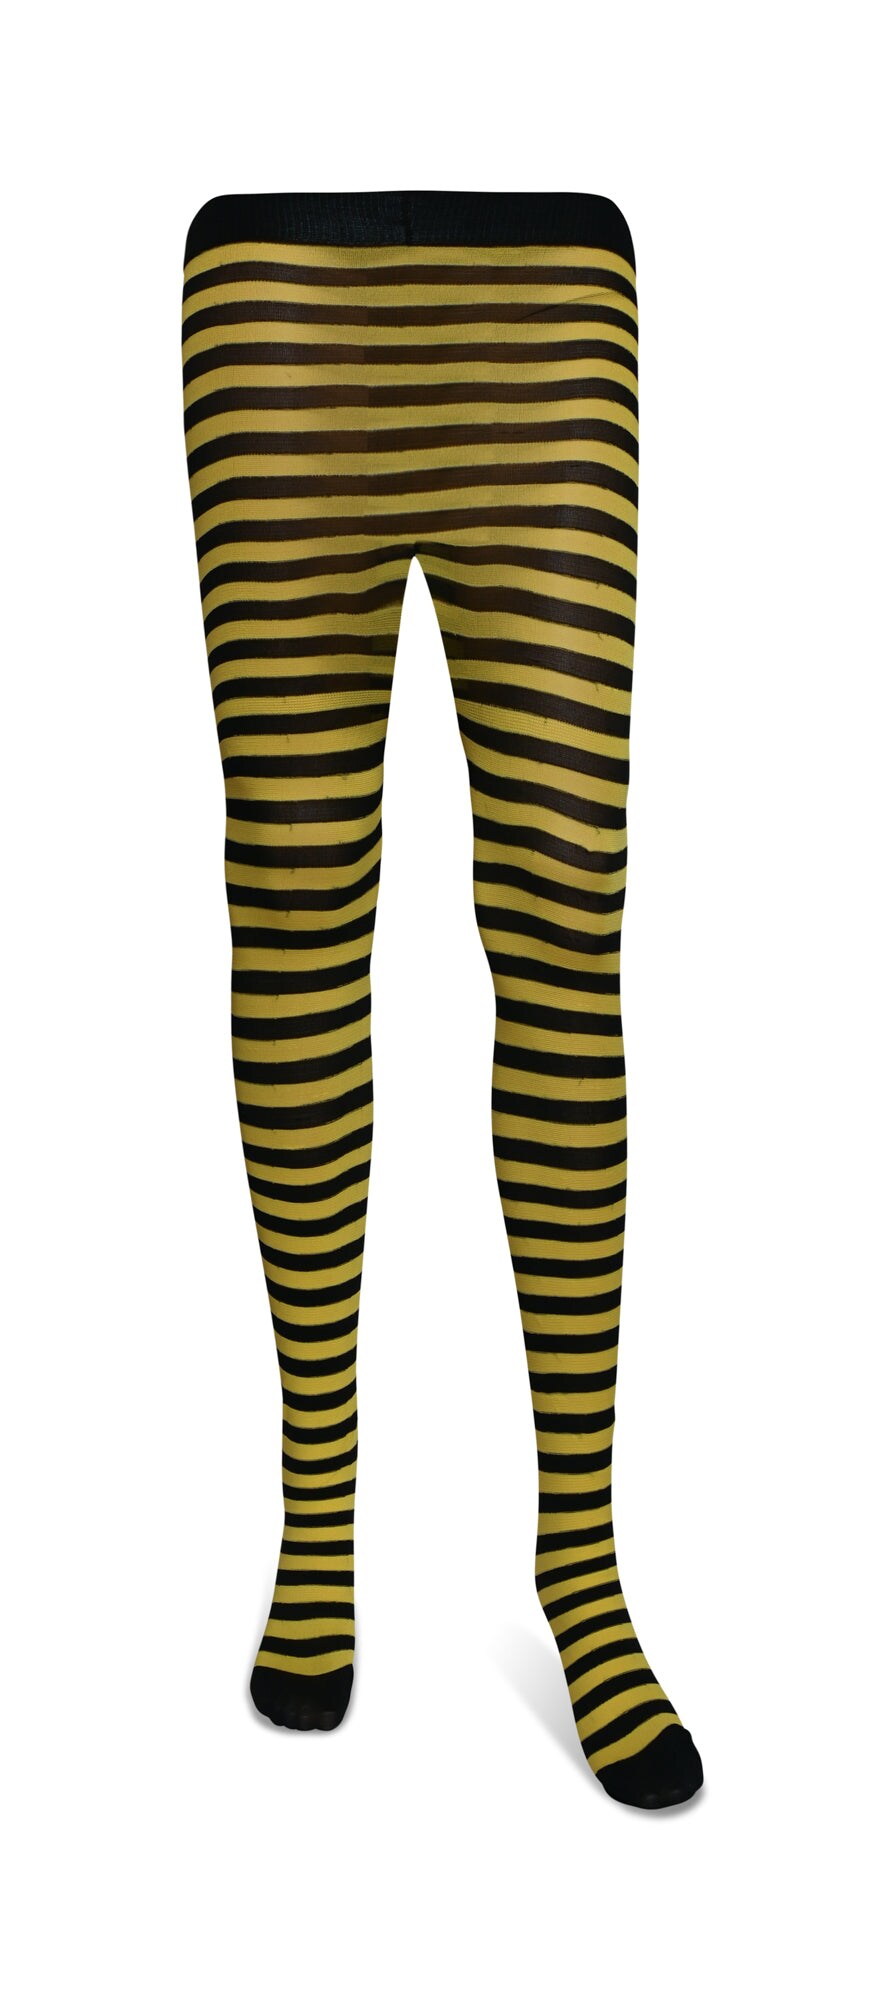 Black and Yellow Tights - Striped Nylon Bumble Bee Stretch Pantyhose  Stocking Accessories for Every Day Attire and Costumes for Teens and  Children